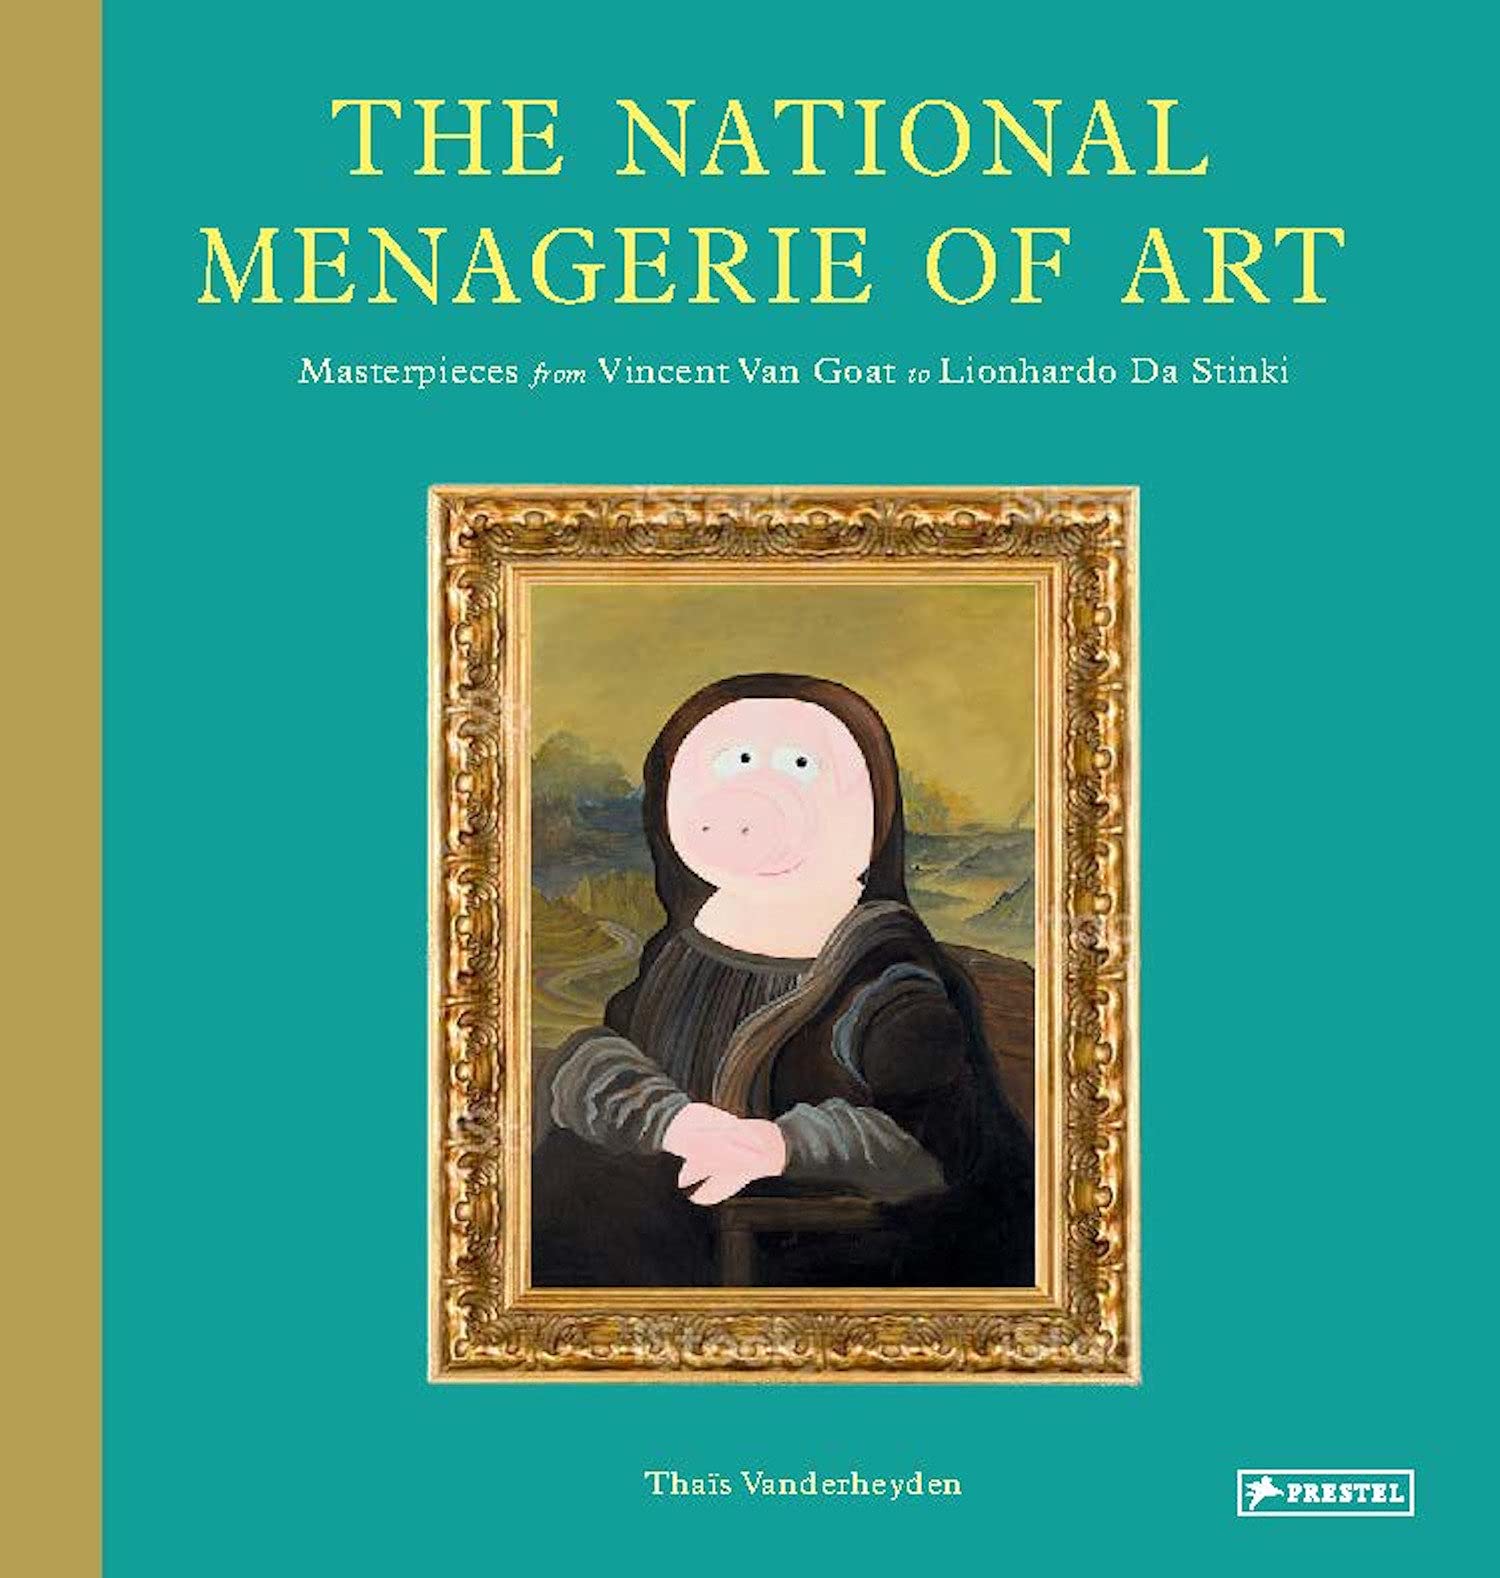 The National Menagerie of Art: Masterpieces from Vincent Van Goat to Lionhardo da Stinki